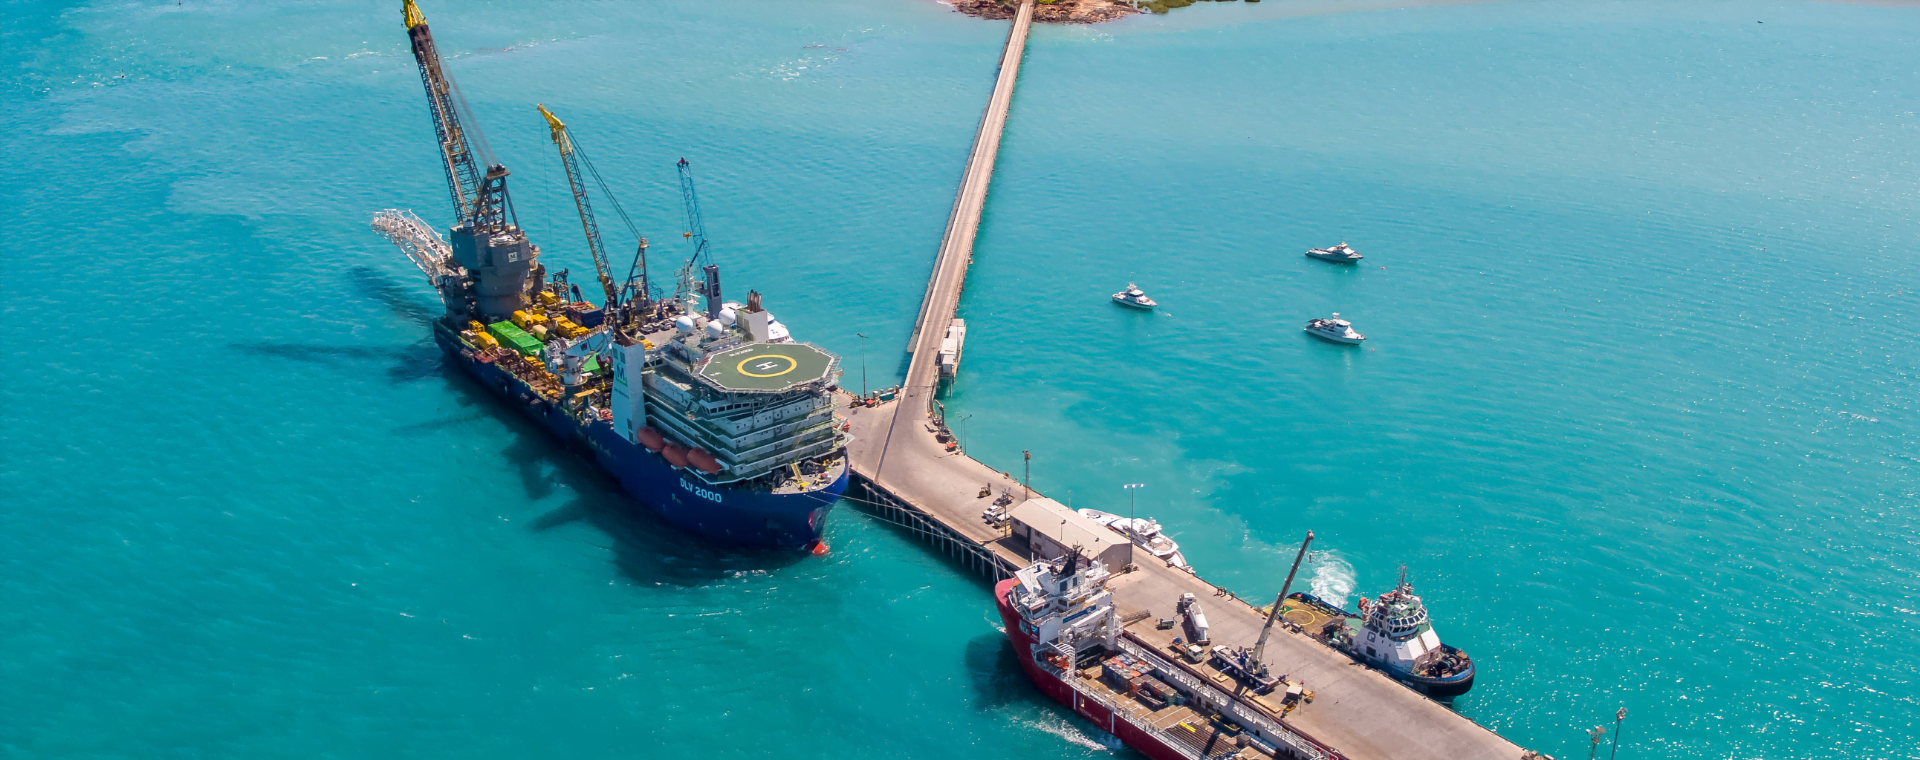 About Port of Broome